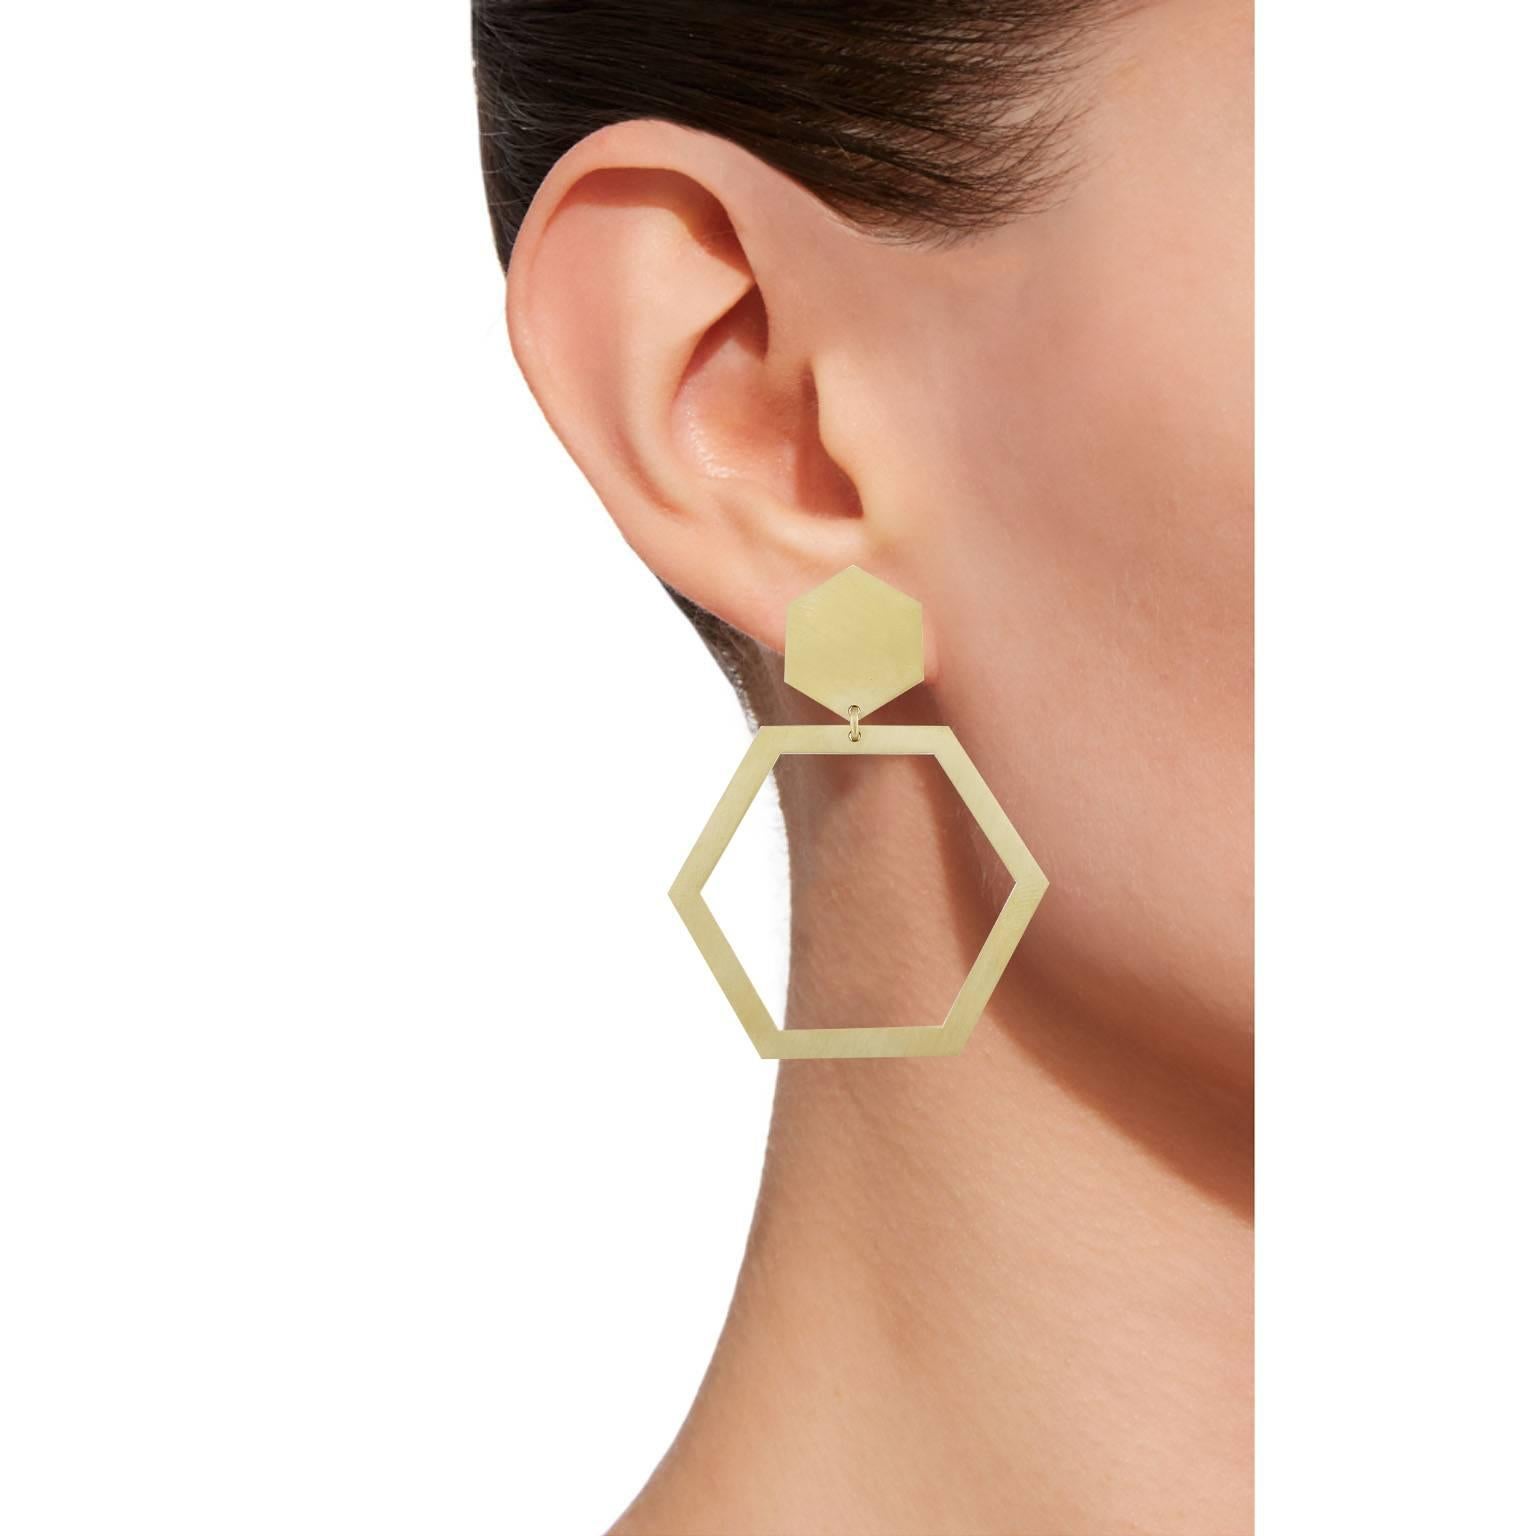 Alex Jona design collection, hand crafted in Italy, 18 karat yellow gold hexagonal dangling earrings.
Dimensions:
Length 2.37